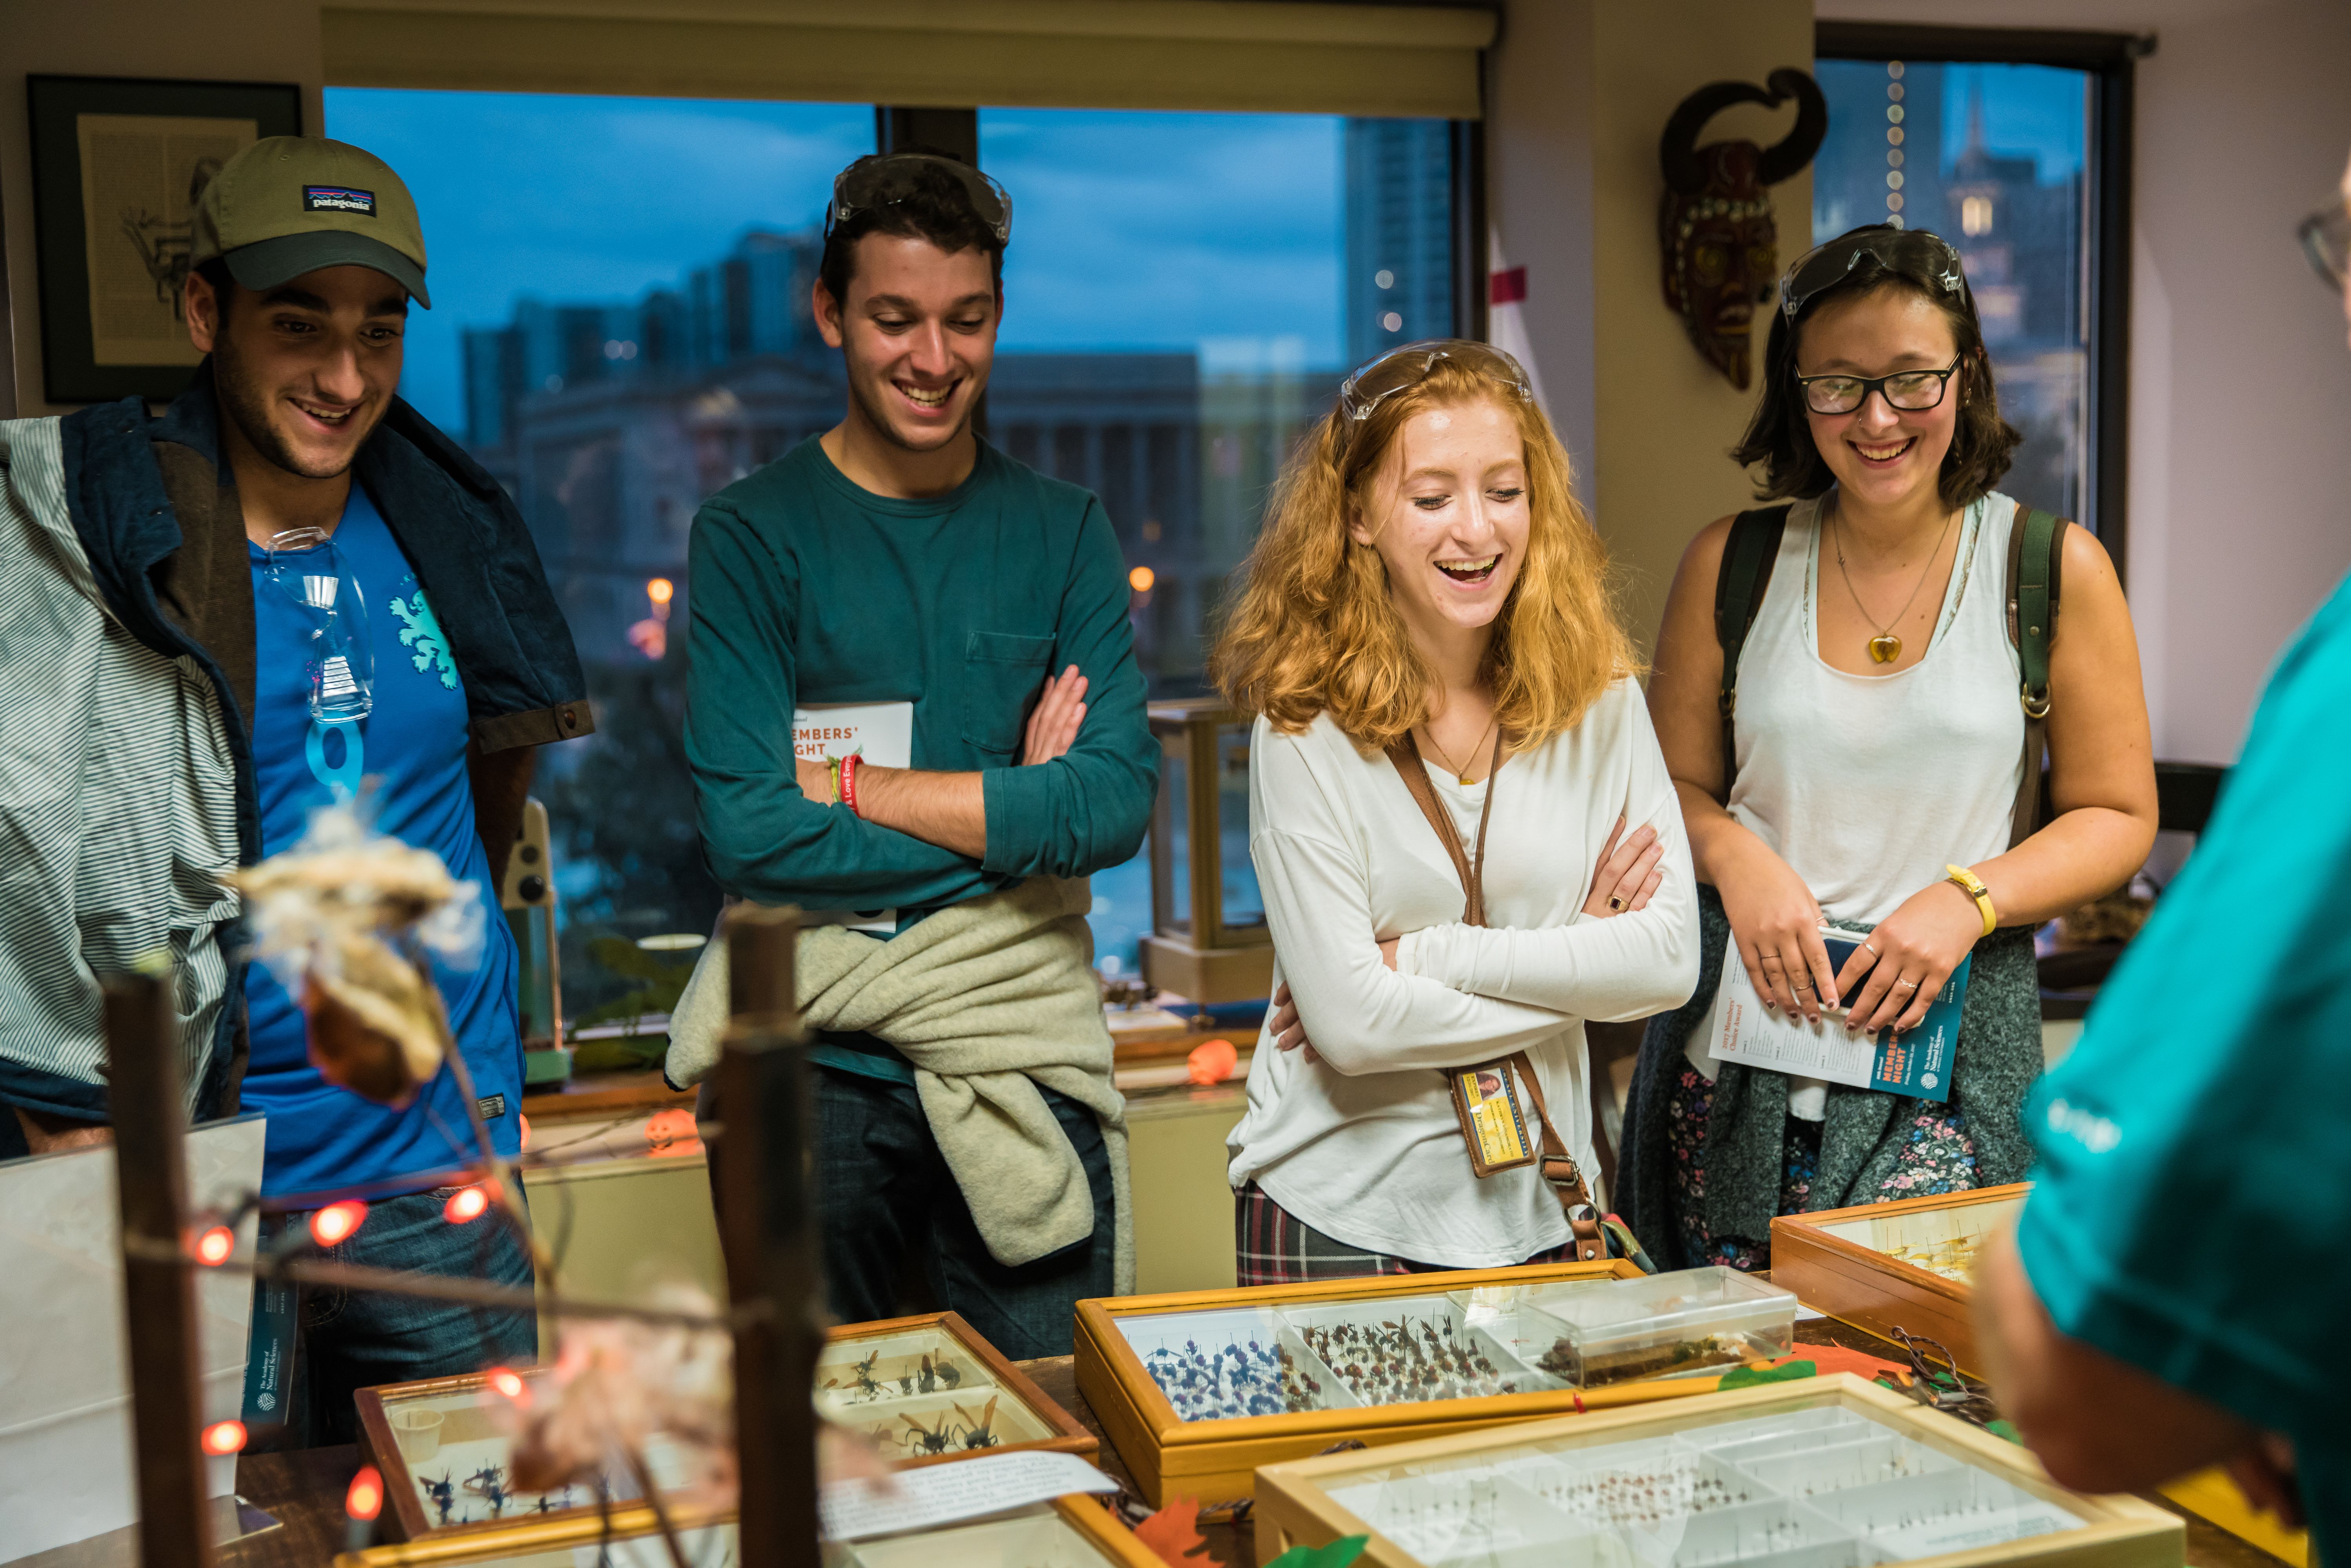 Members learn about insects in the collection